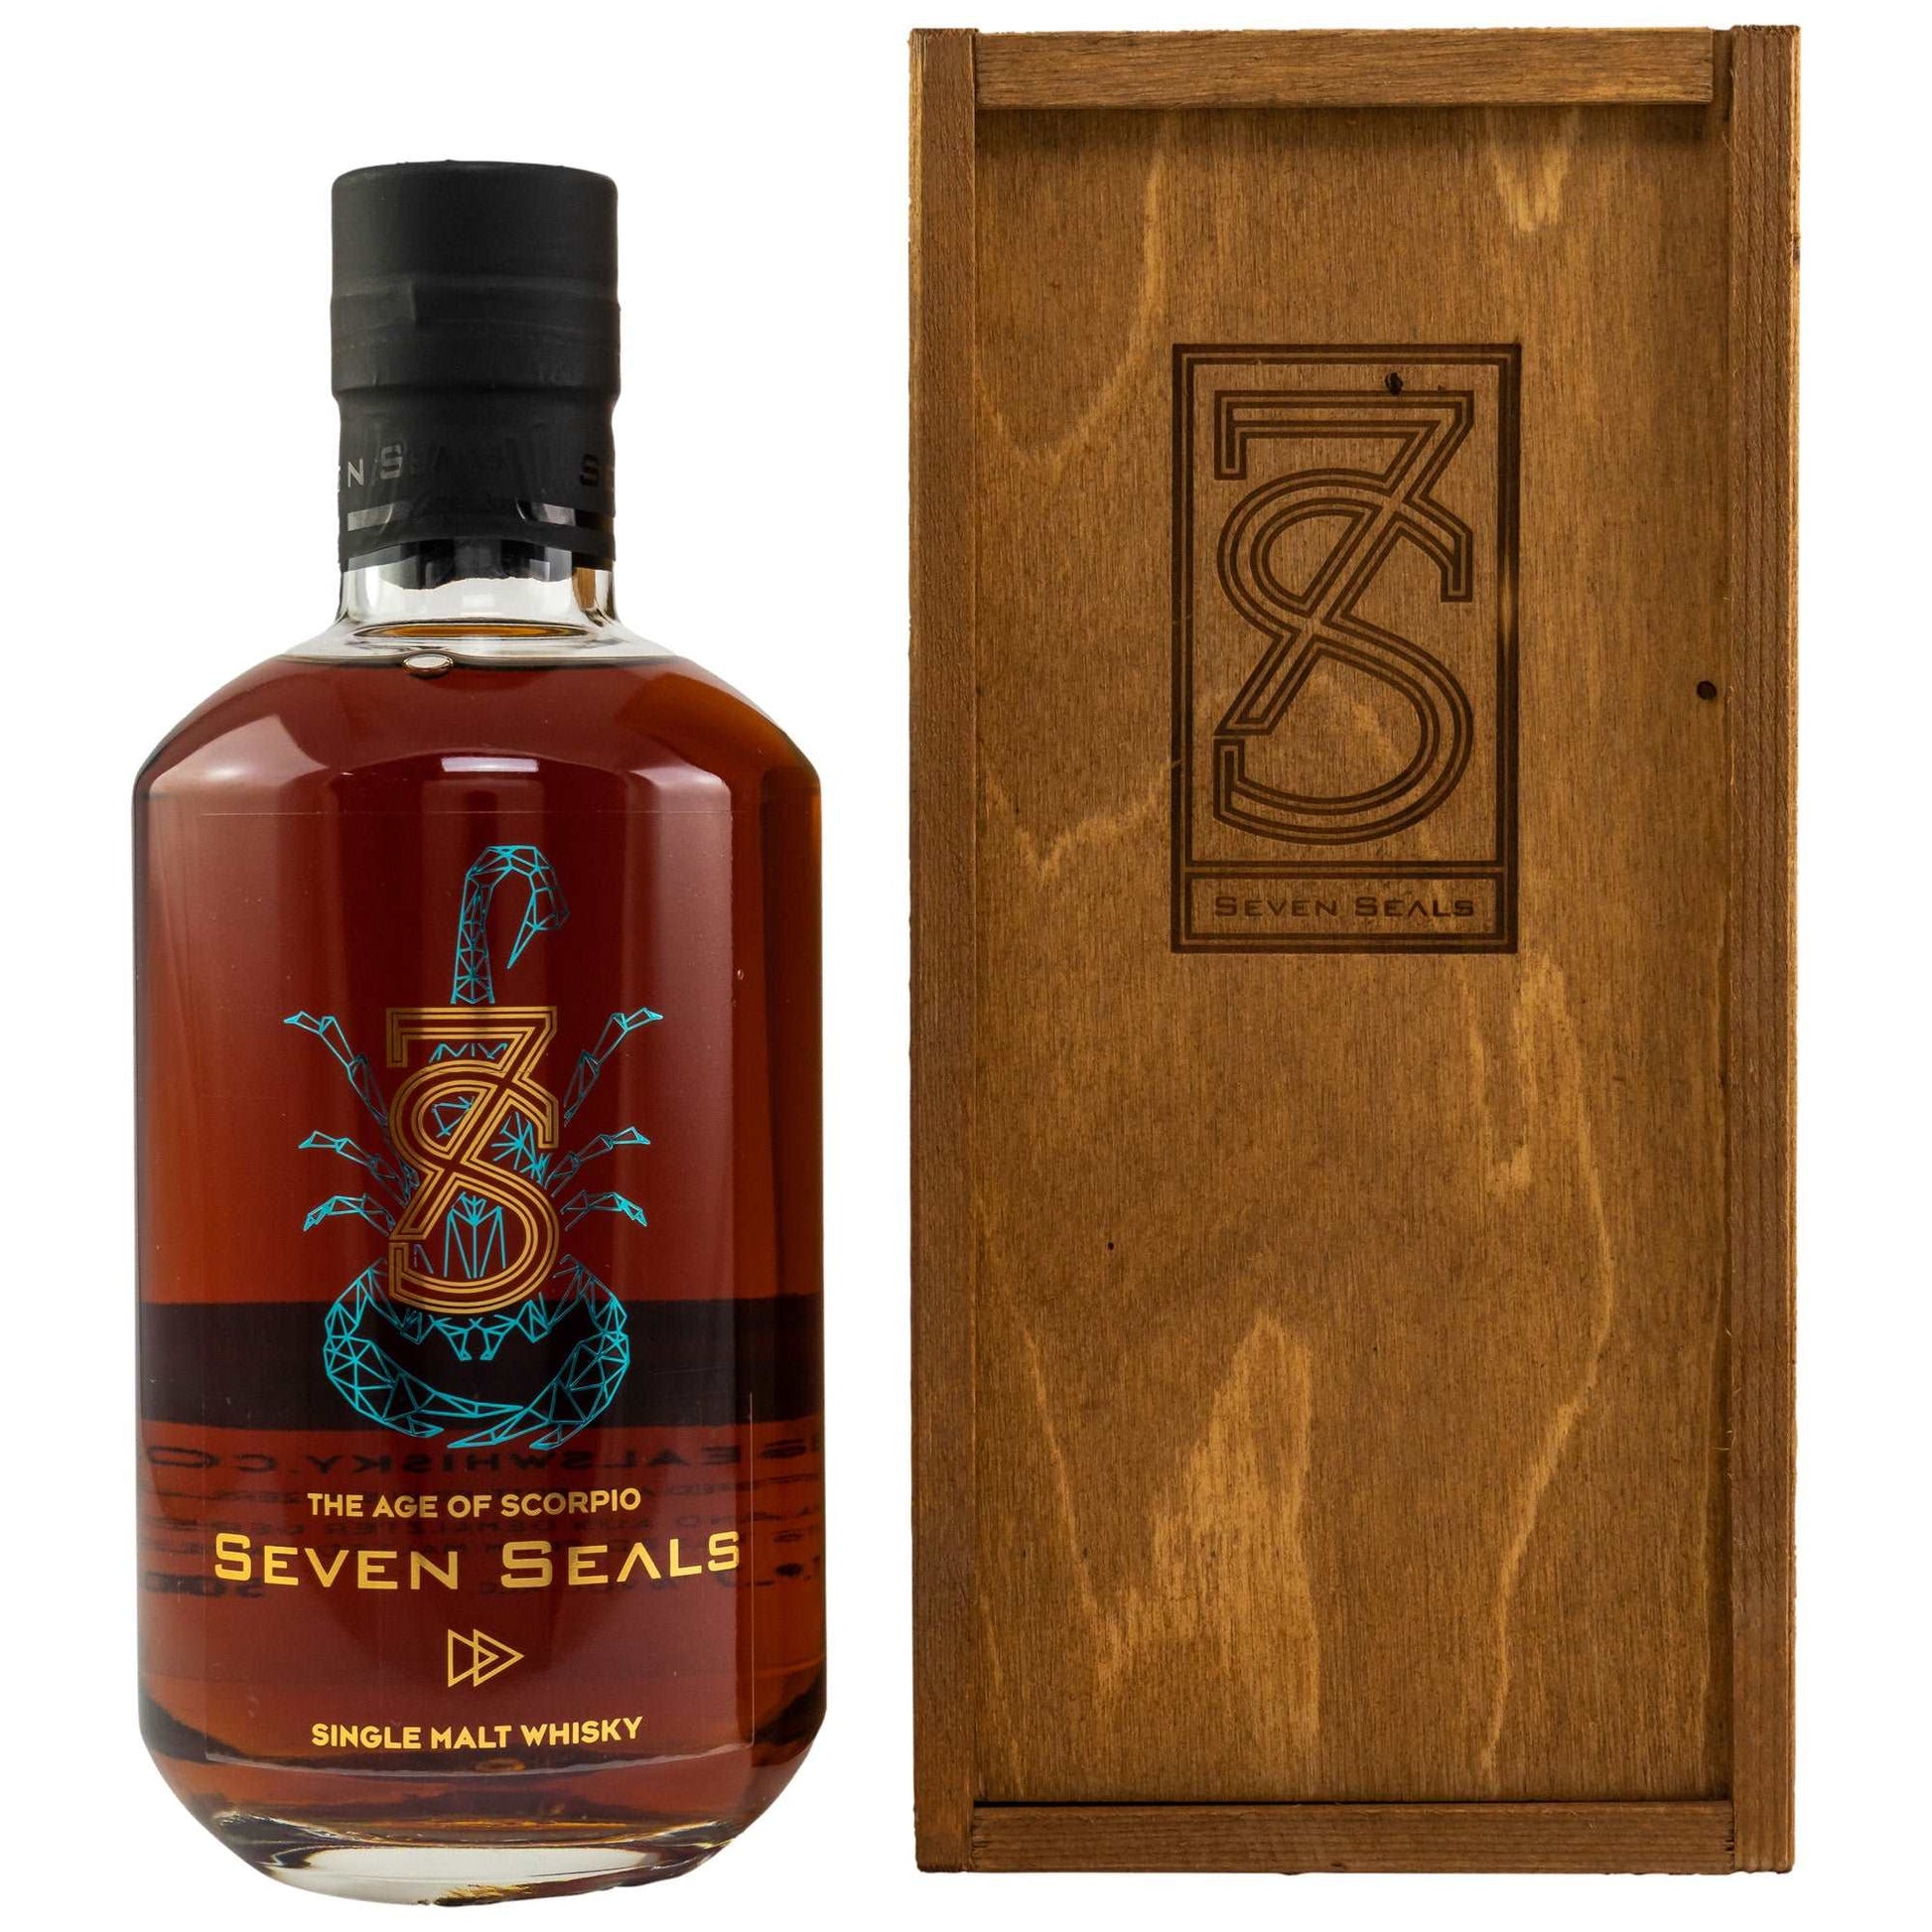 Seven Seals | The Age of Scorpio | Whisky | 0,5l | 49,7% | inklusive 7Seals Whisky Glas GRATISGET A BOTTLE